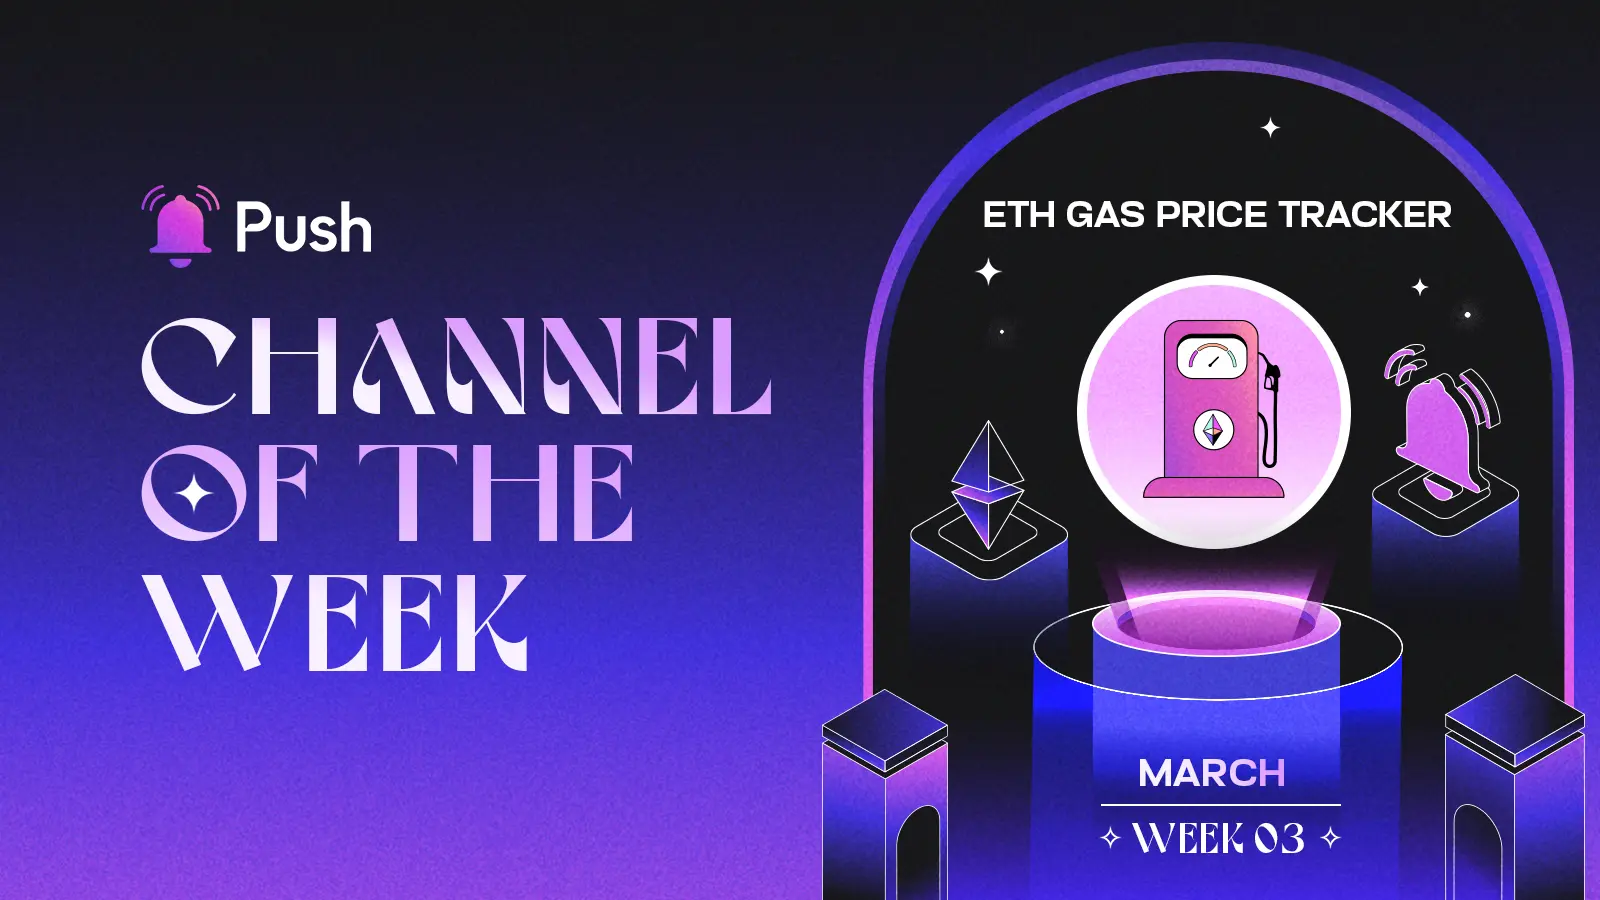 Banner celebrating ETH Gas Price Tracker as March - week 3 channel of week